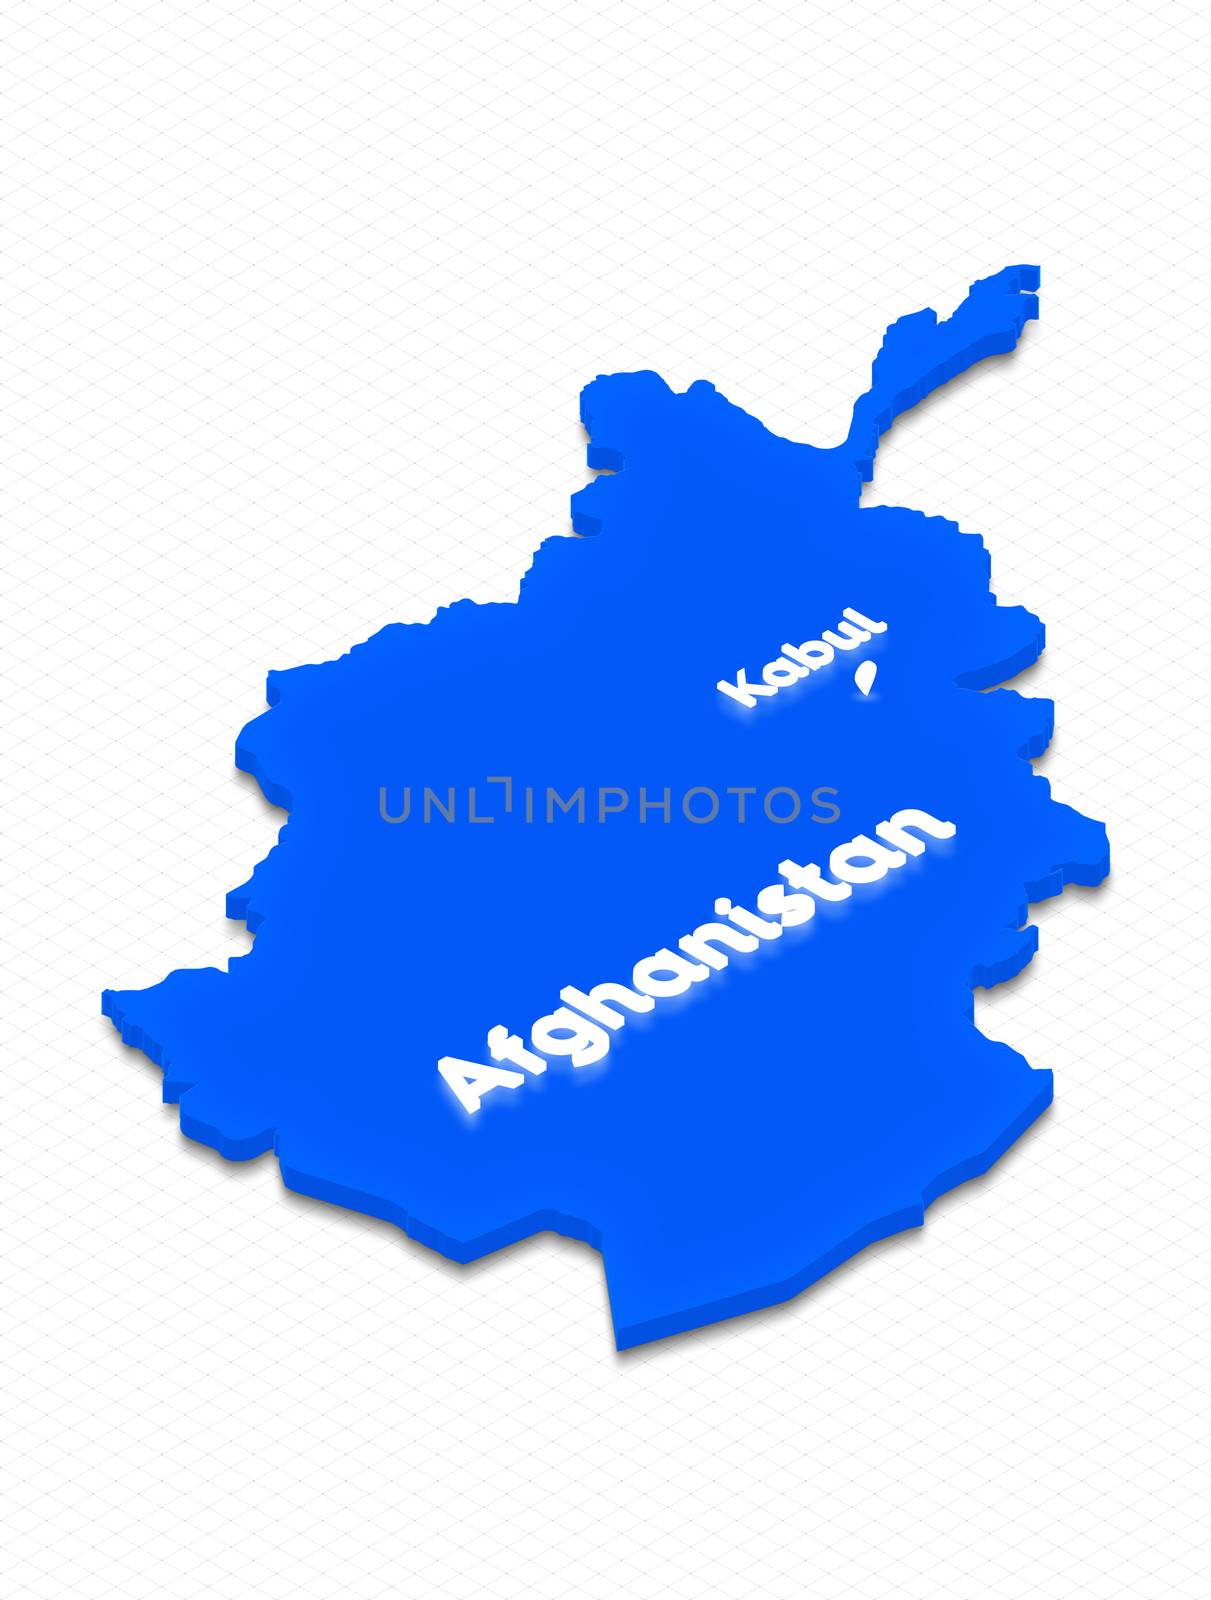 Illustration of a blue ground map of Afghanistan on grid background. Right 3D isometric perspective projection with the lighting name of country and capital Kabul.